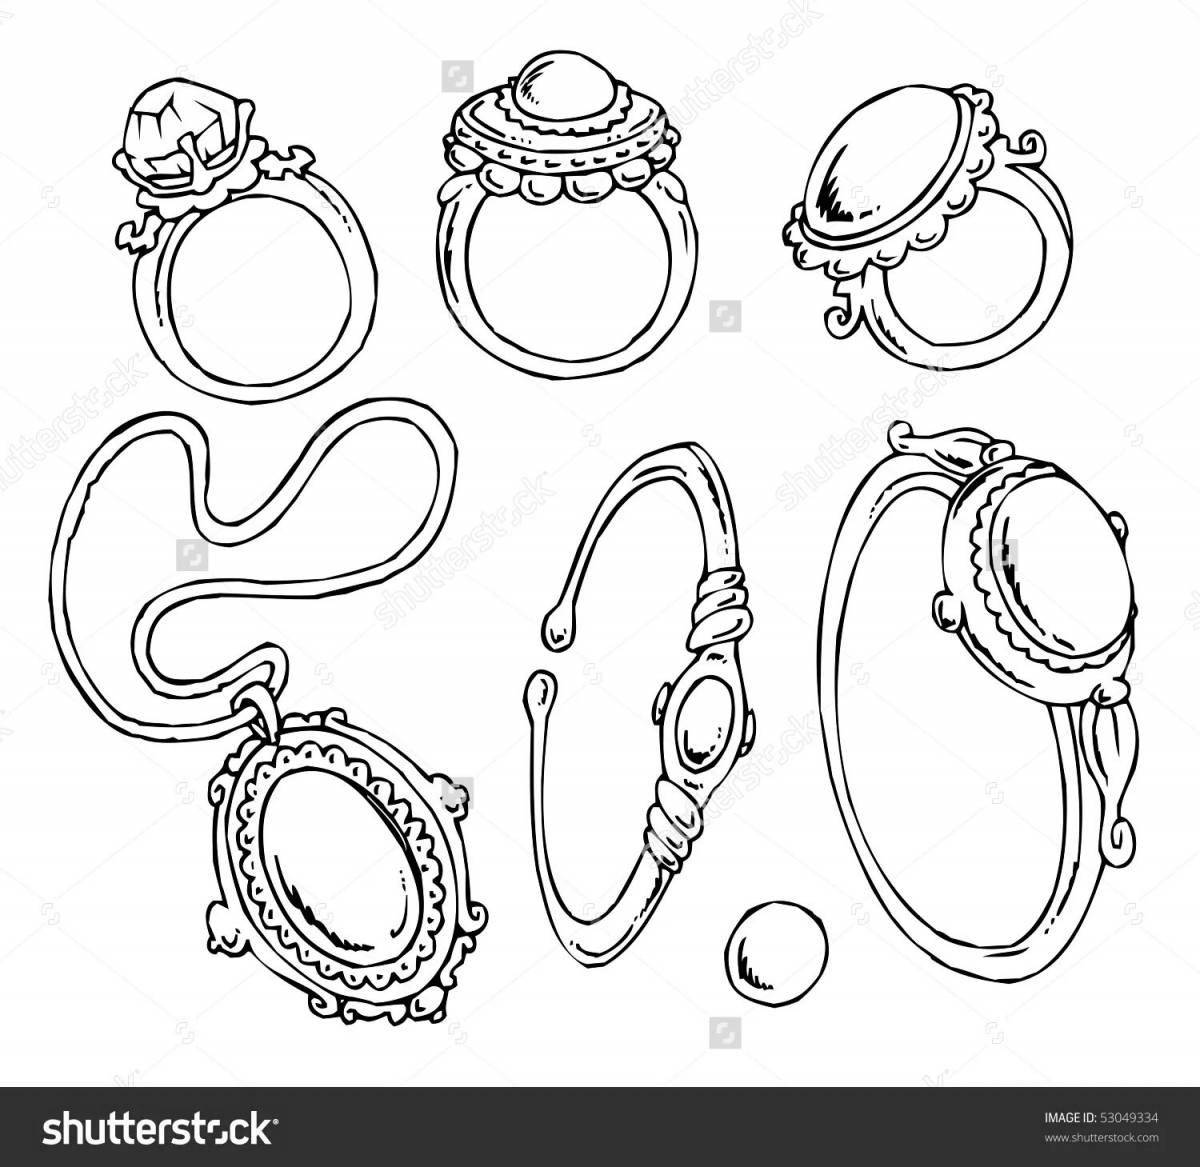 Amazing ring coloring page for toddlers